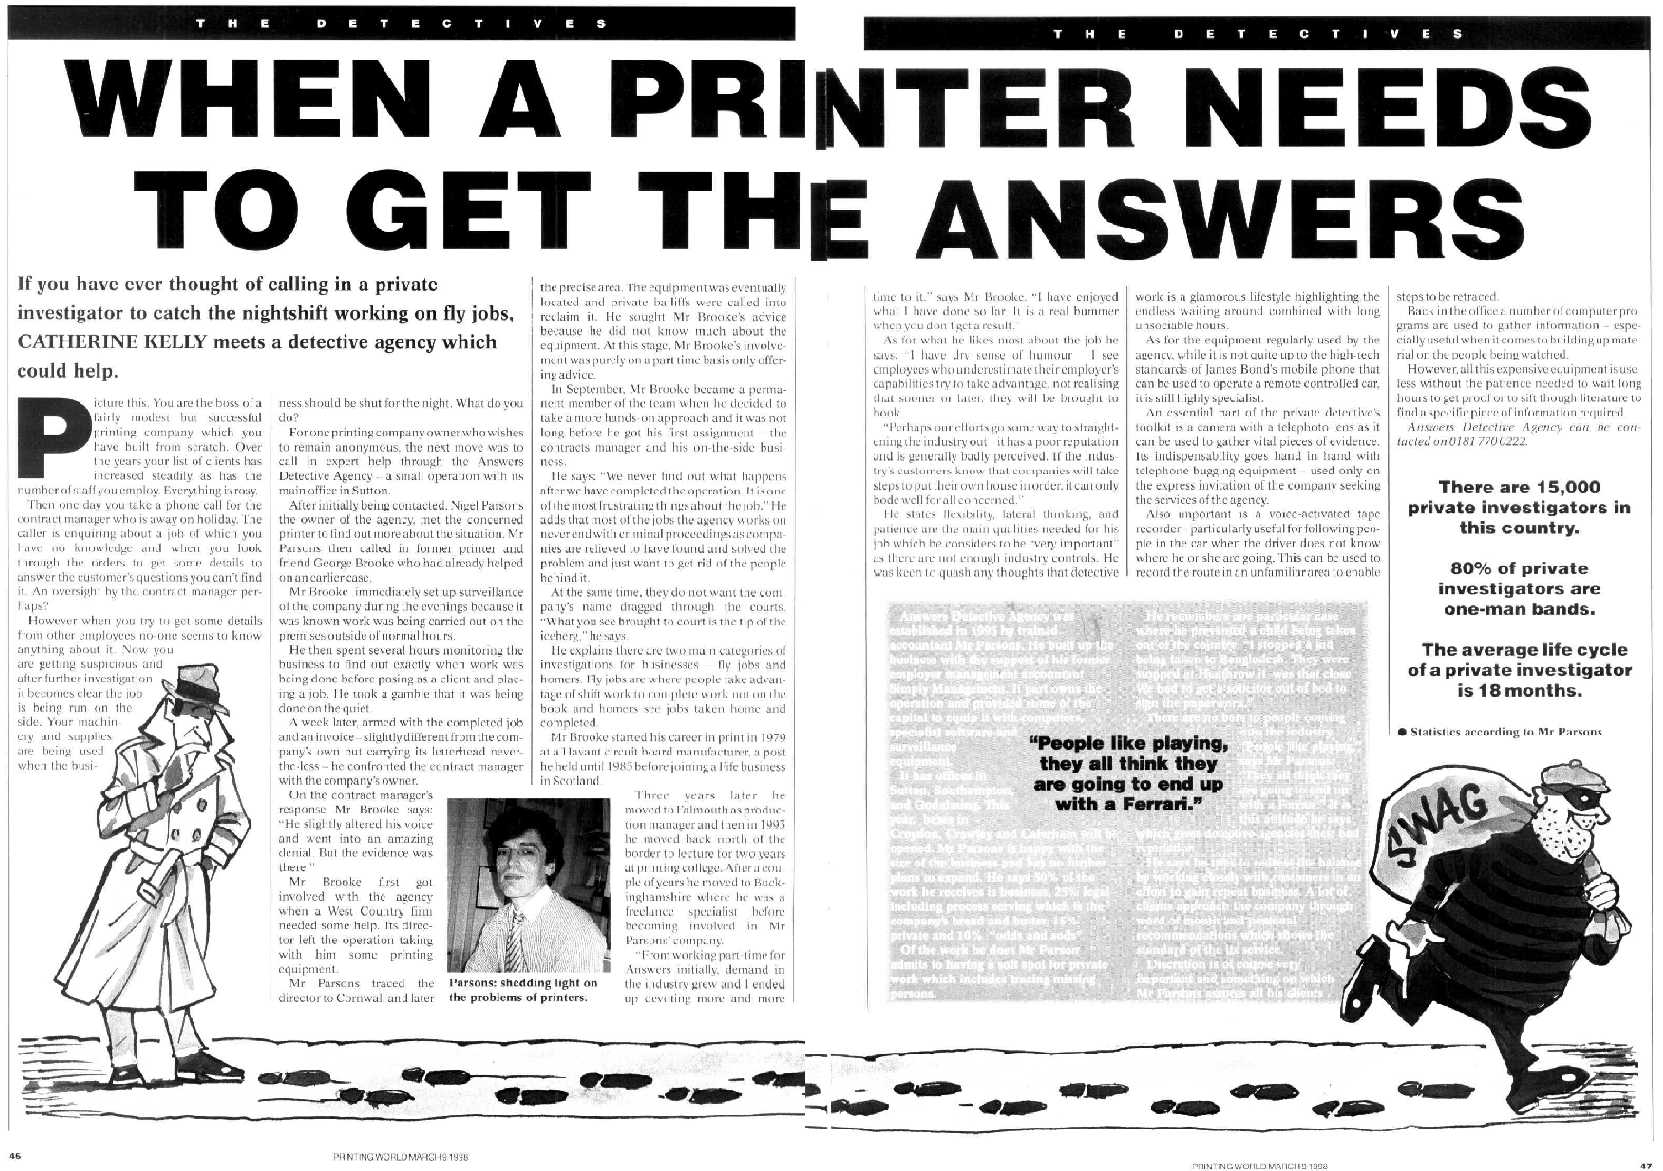 Investigation into the print industry